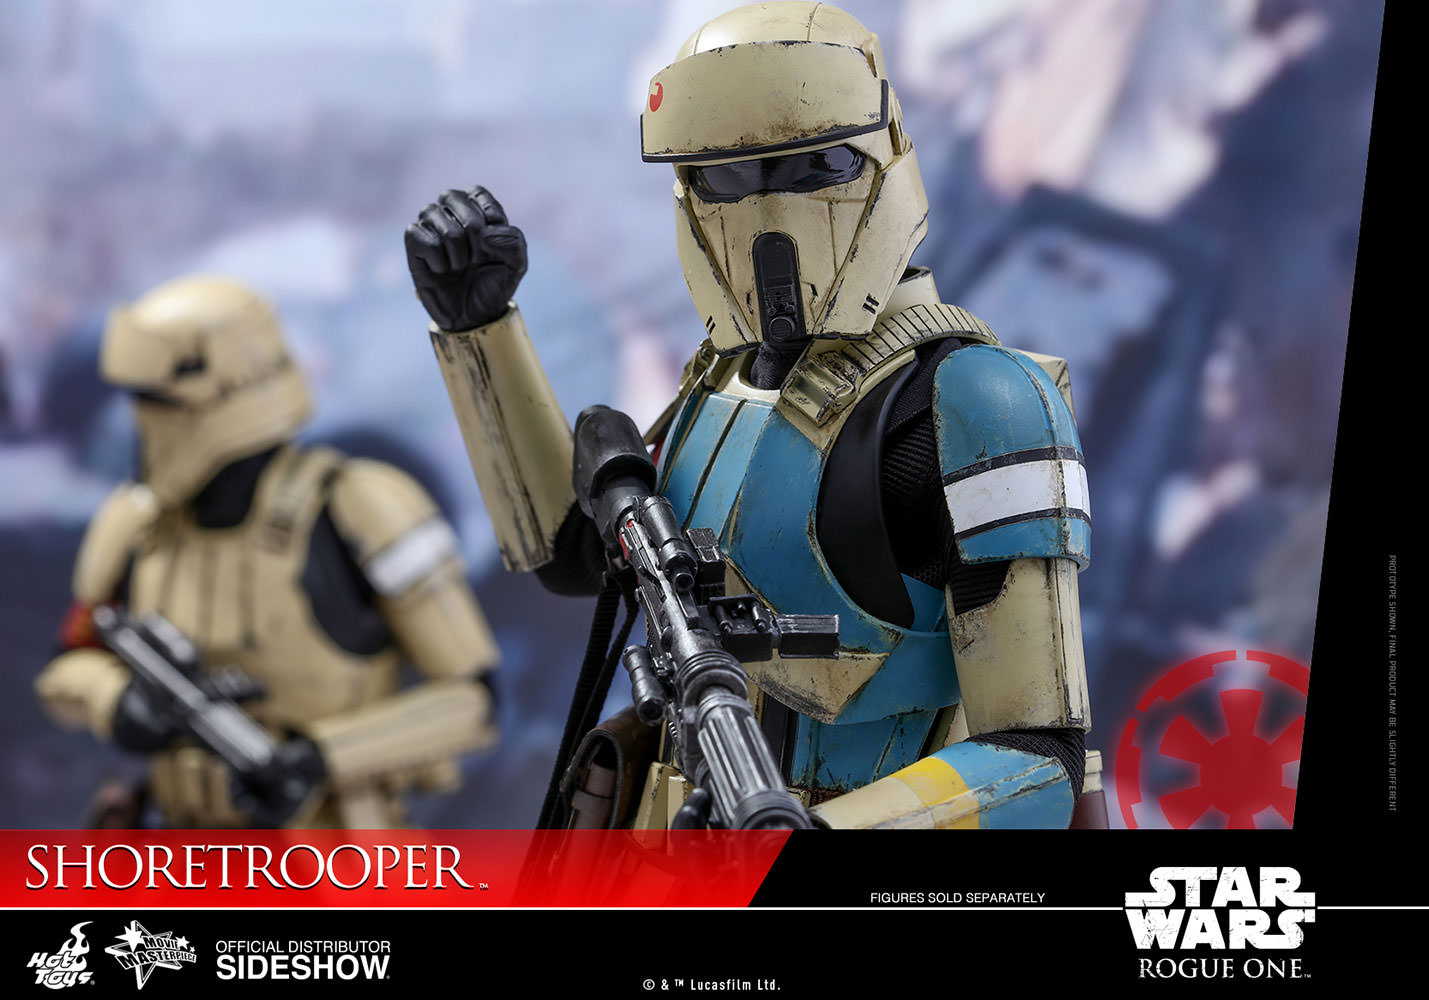 star-wars-rogue-one-shoretroopers-sixth-scale-hot-toys-902862-13.jpg